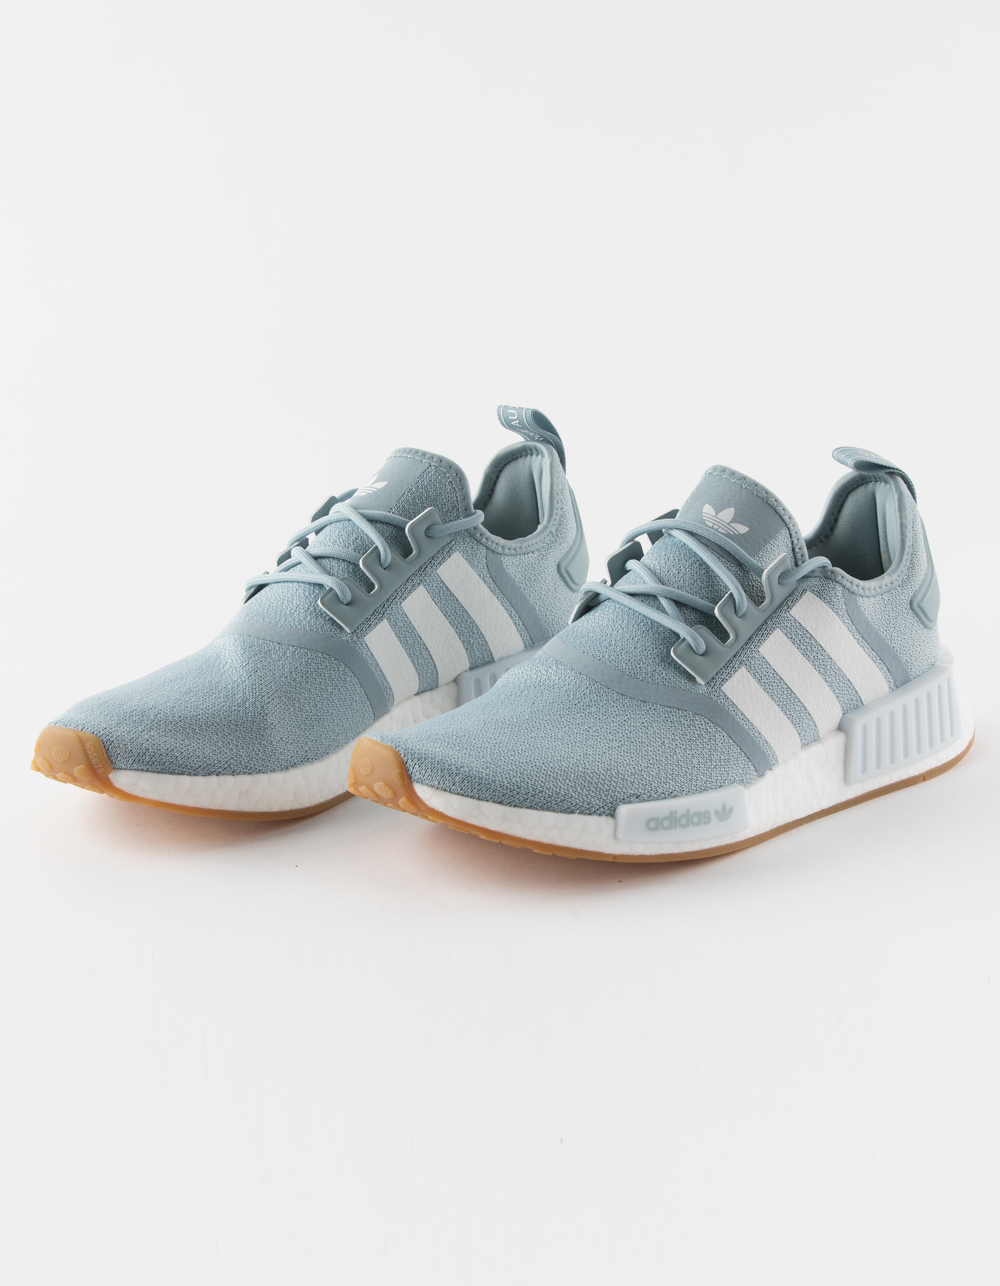 ADIDAS NMD R1 Mens Shoes GRAY | Tillys